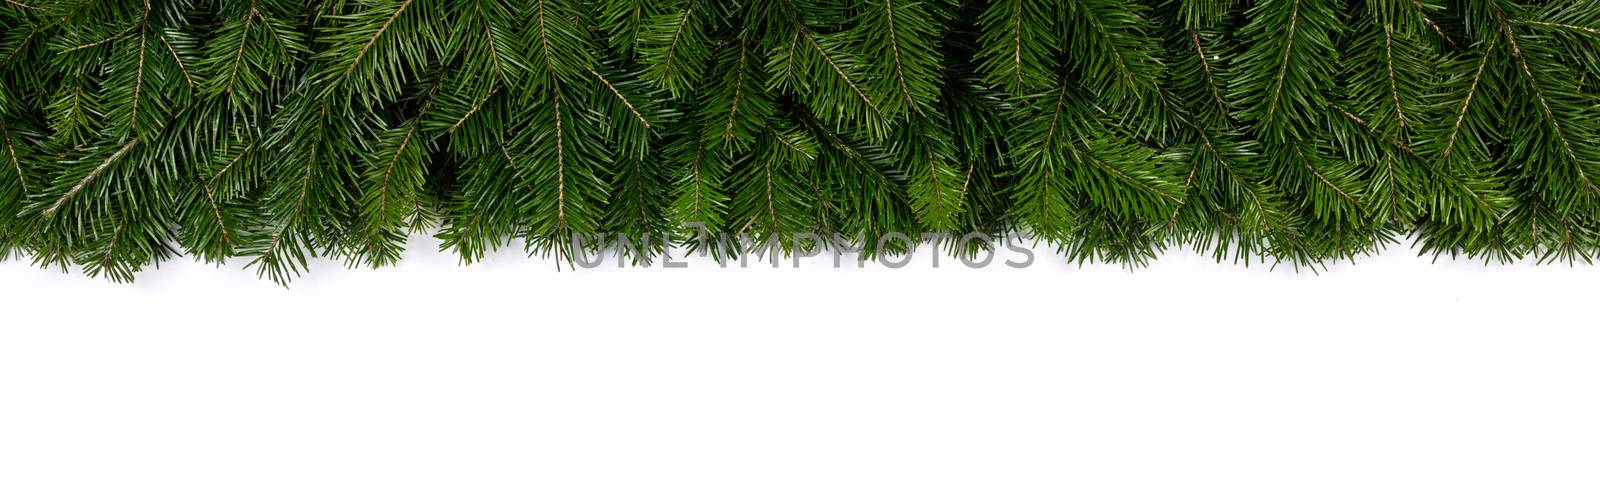 Christmas fir tree branch border fame isolated on white background with copy space for text